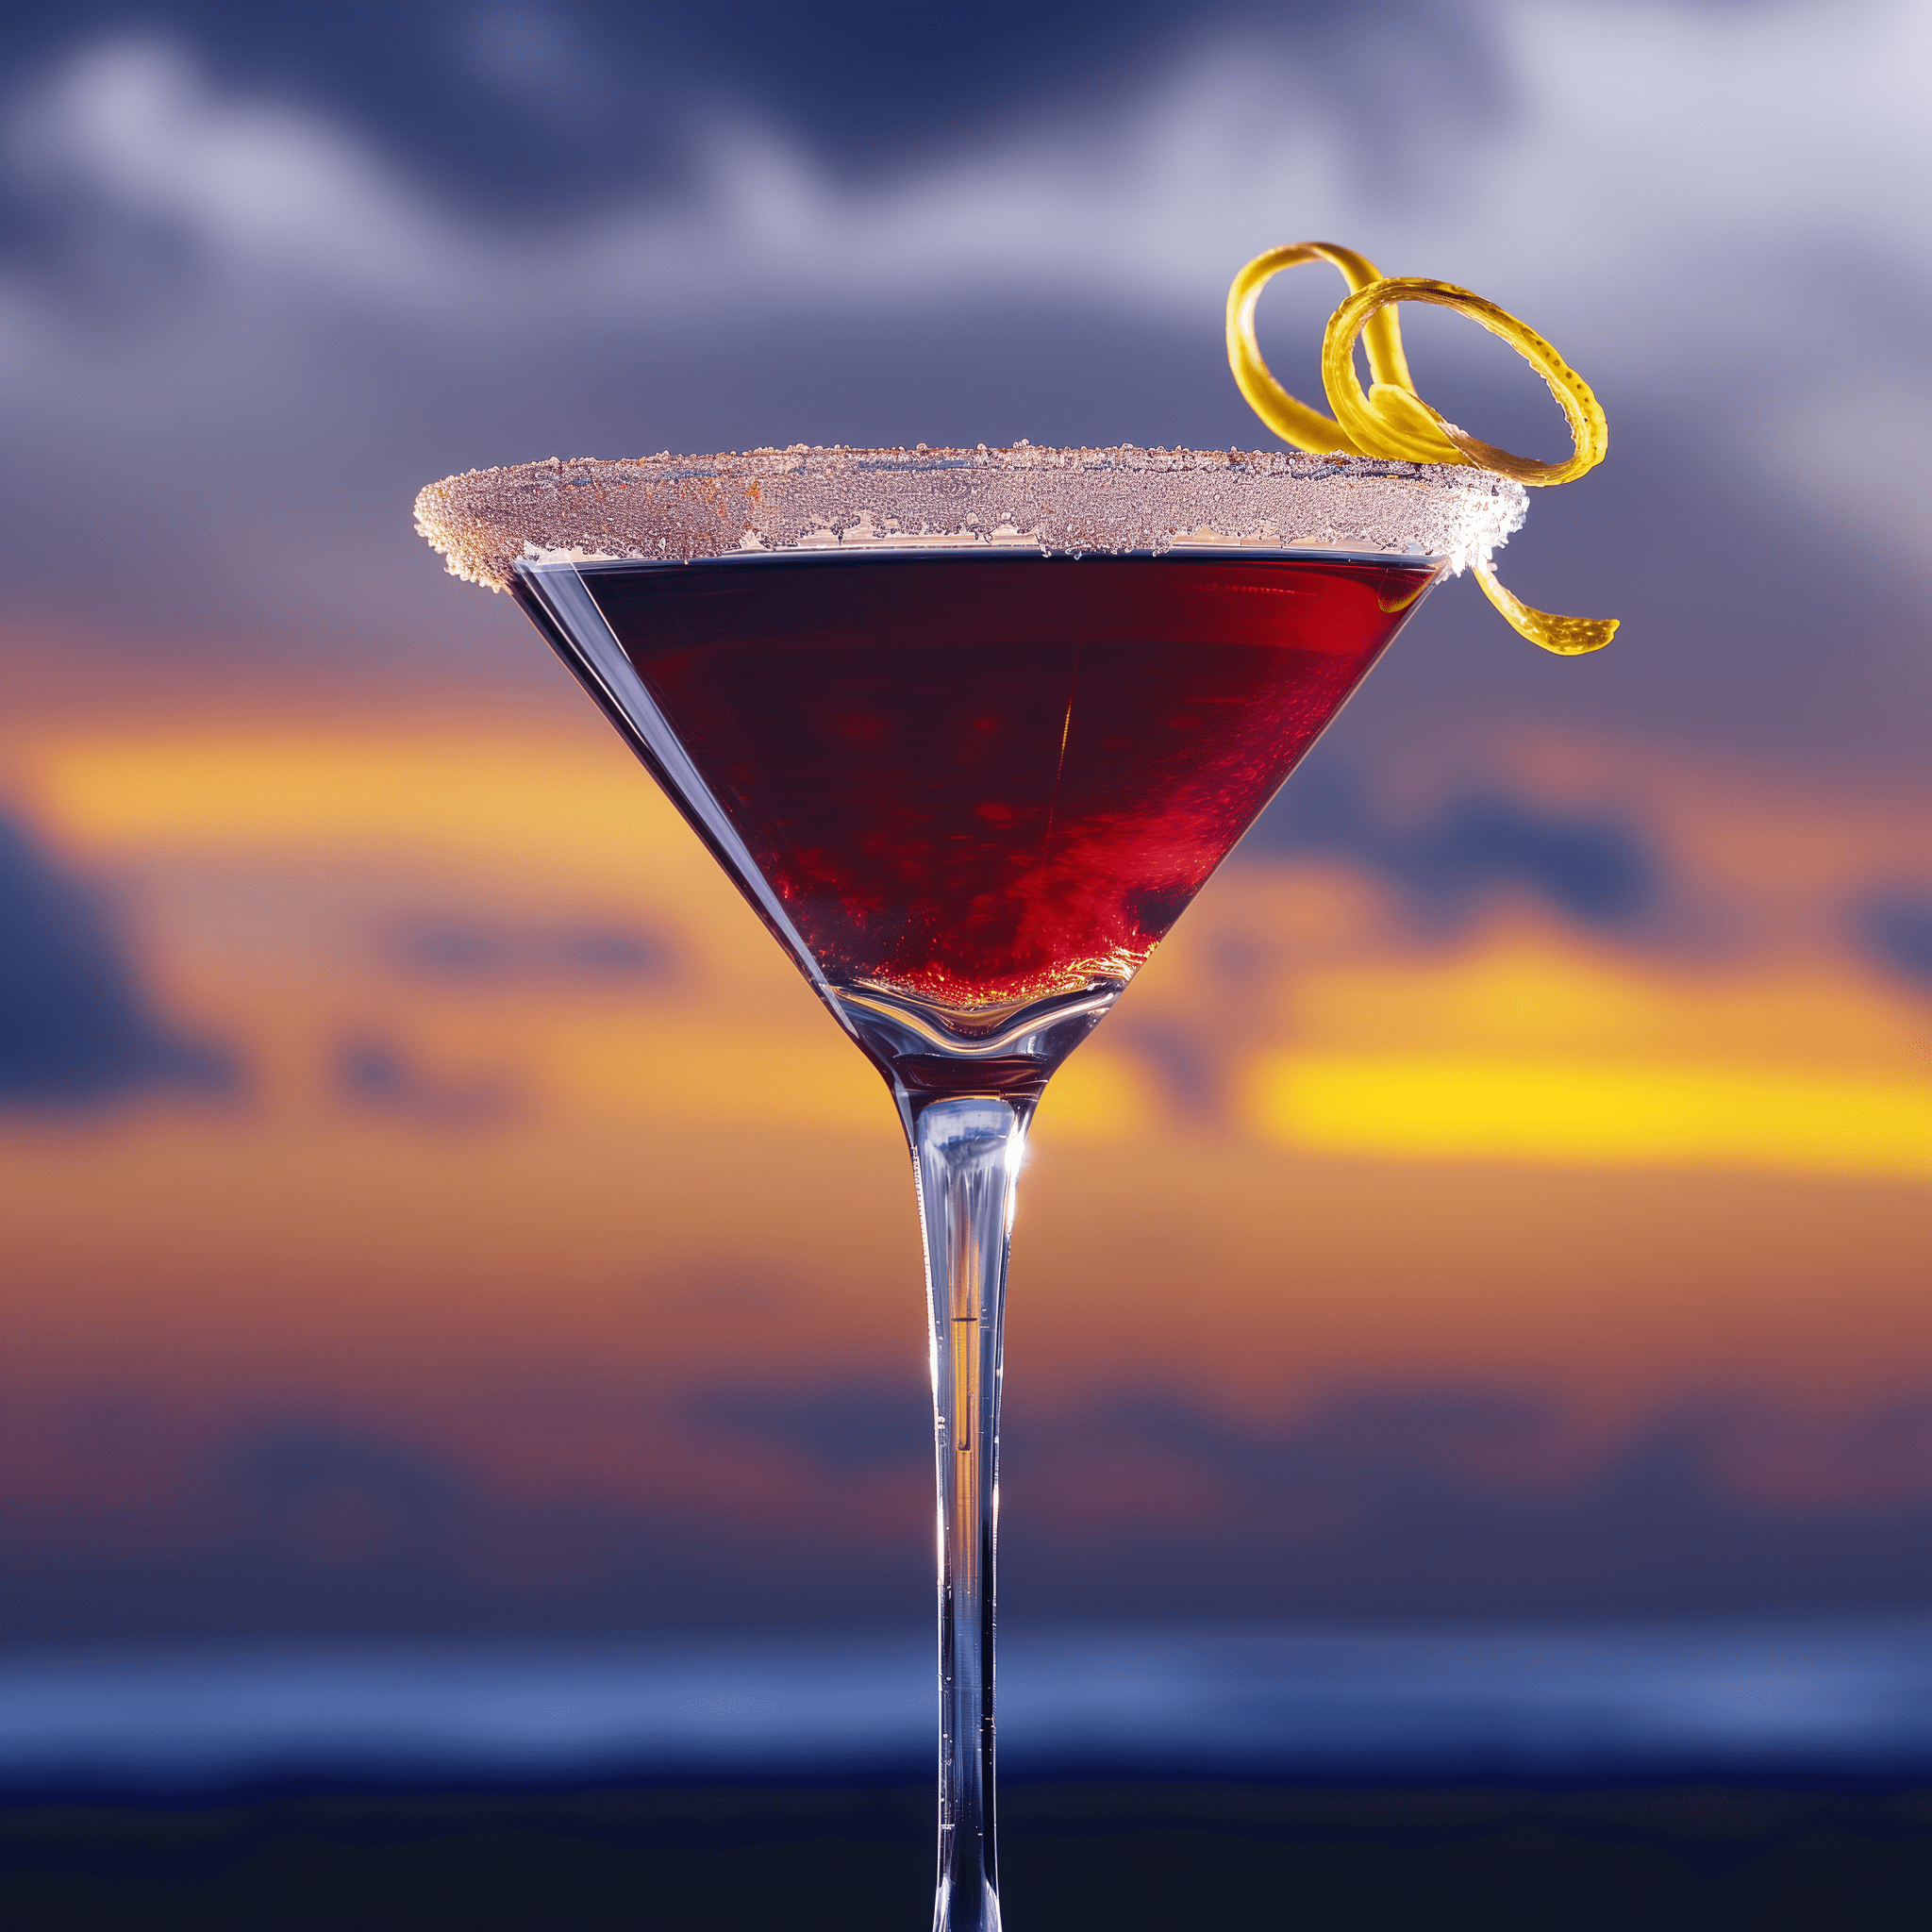 Blackberry Lemon Drop Cocktail Recipe - The Blackberry Lemon Drop is a delightful mix of sweet and sour with a robust blackberry essence. The citrus punch of lemon is perfectly complemented by the subtle sweetness of Triple Sec, while the vodka provides a smooth, strong backbone.